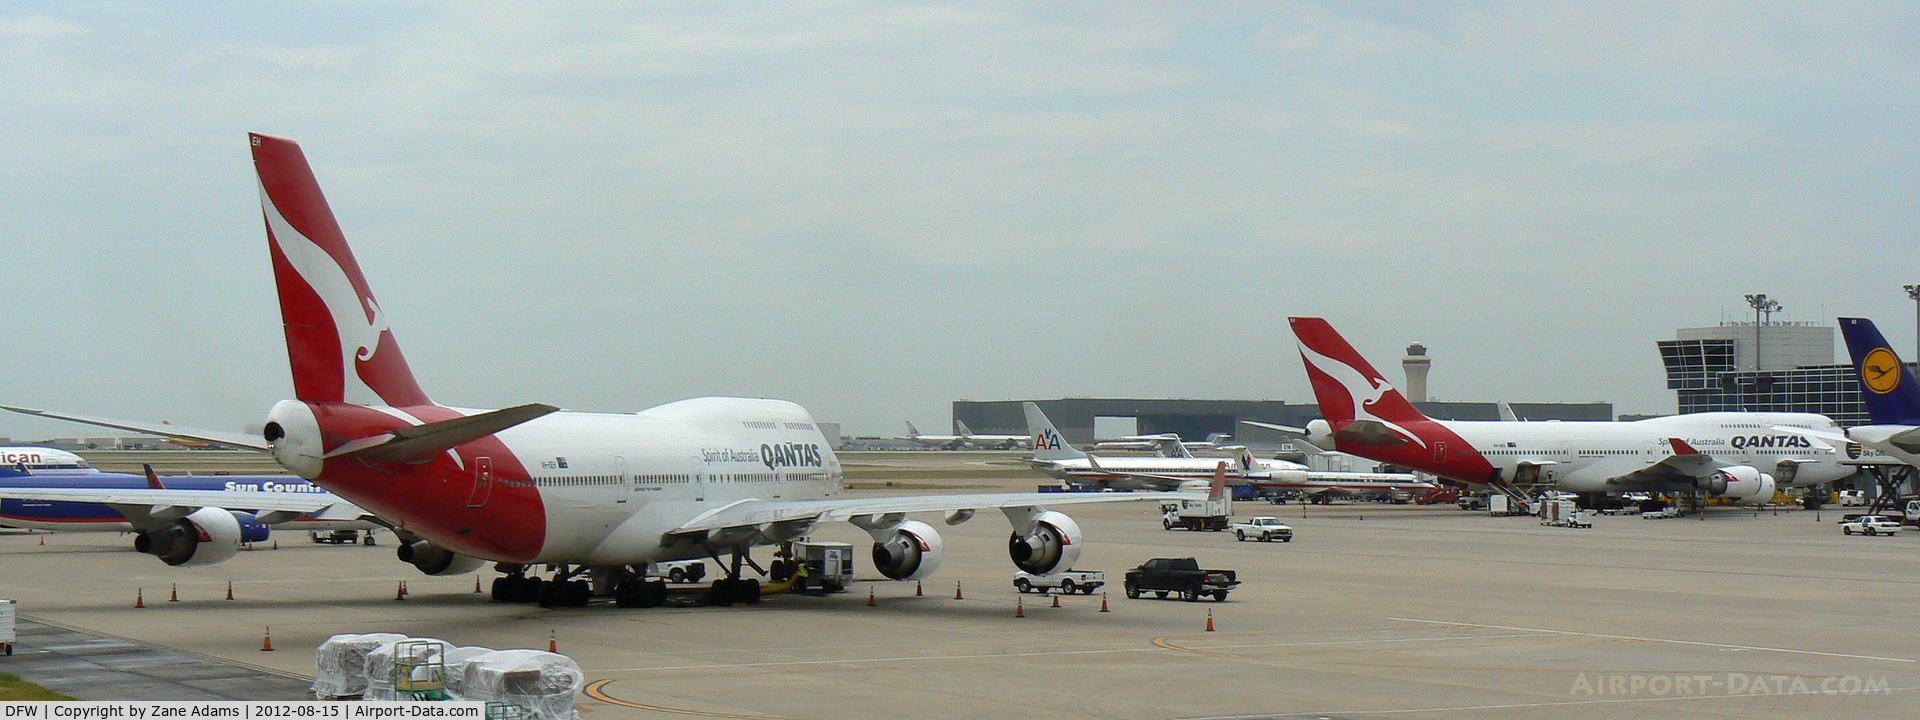 Dallas/fort Worth International Airport (DFW) - Two Qantas 747 Longreach aircraft on the ramp at DFW Airport